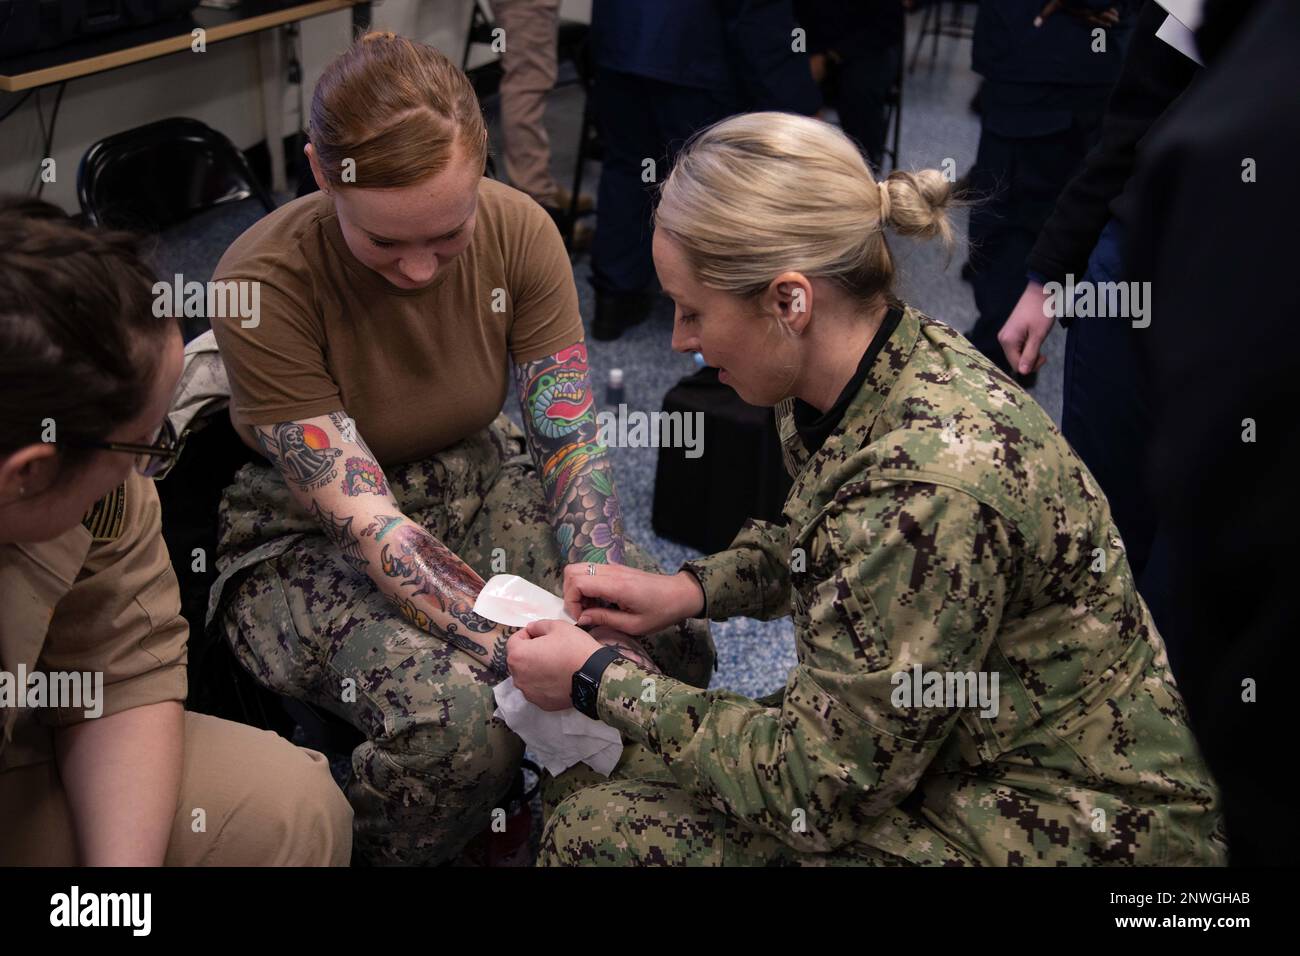 Lt. Cmdr. Susan Murphy, from Modesto, Calif., the first-in-class aircraft carrier USS Gerald R. Ford’s (CVN 78) ship’s nurse, applies a fake bruising wound to Hospital Corpsman 3rd Class Abigail Riddle, from Woodruff, S.C., assigned to Ford's medical department, during moulage application training, Jan. 25, 2023. Moulage is the art of applying mock injuries for the purpose of training emergency response teams and other medical and military personnel. Ford is in port at Naval Station Norfolk for a continuous planned maintenance availability. Stock Photo